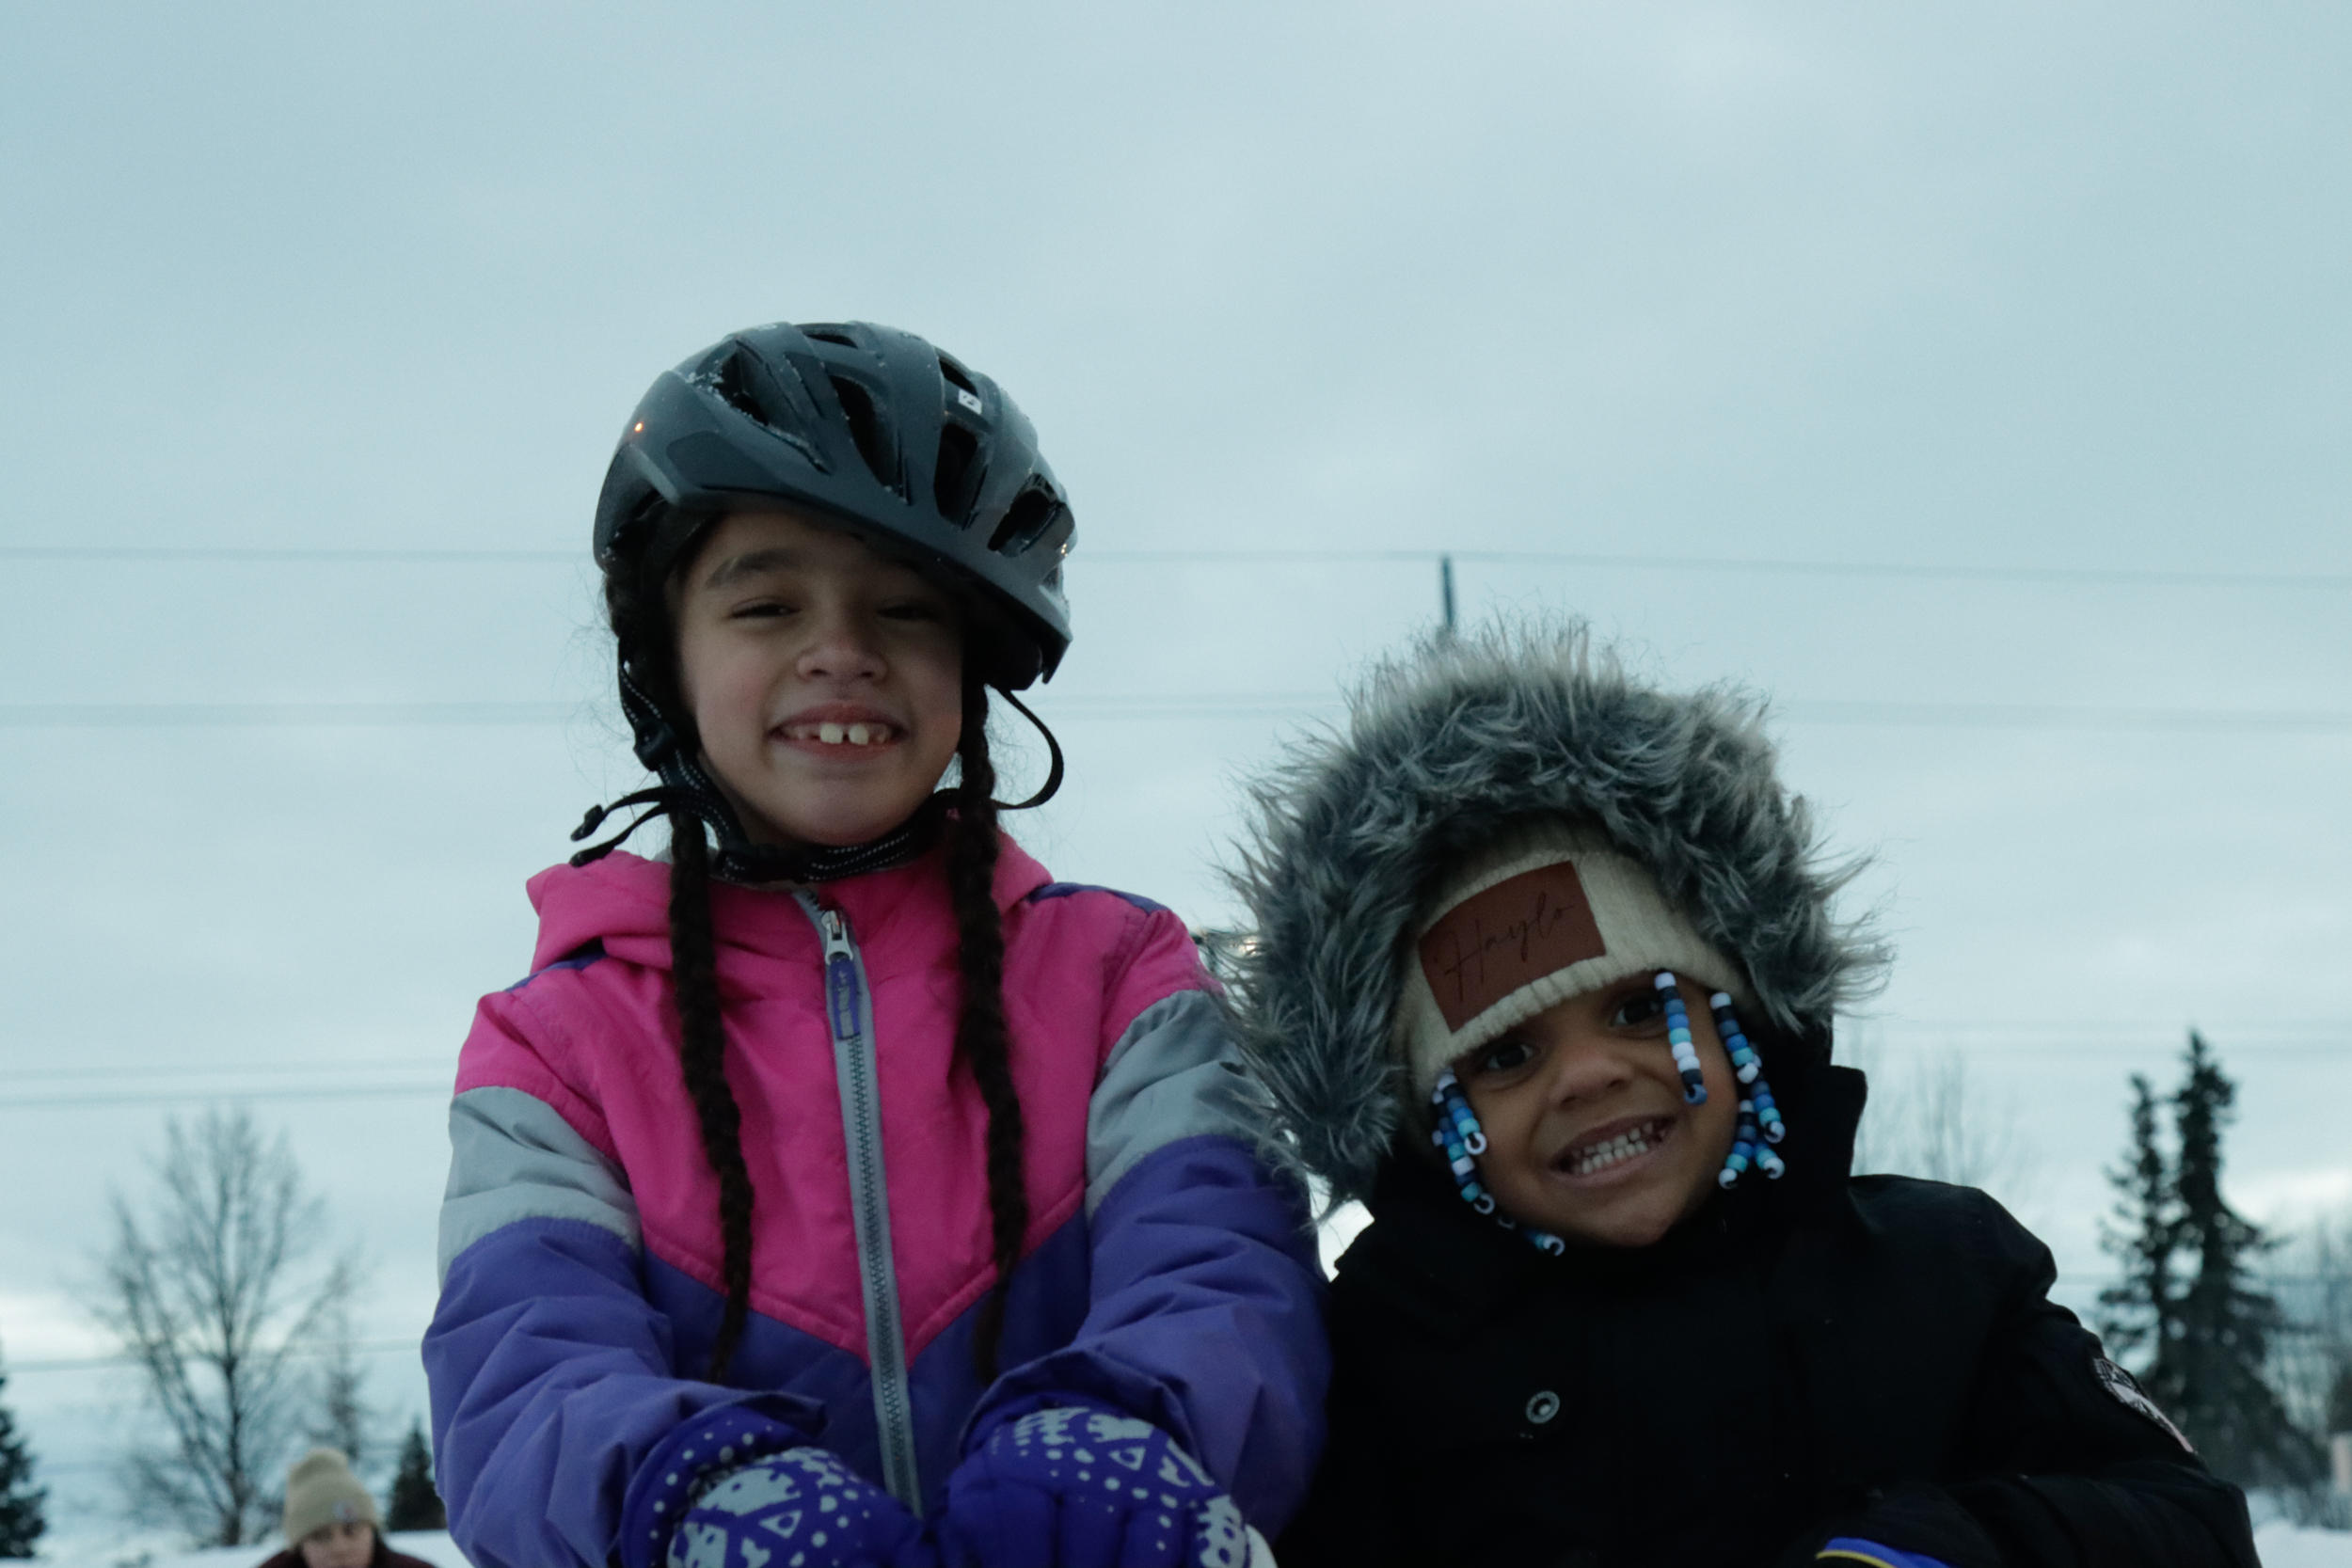 Two young girls pose for a photo in snow gear and helmets.